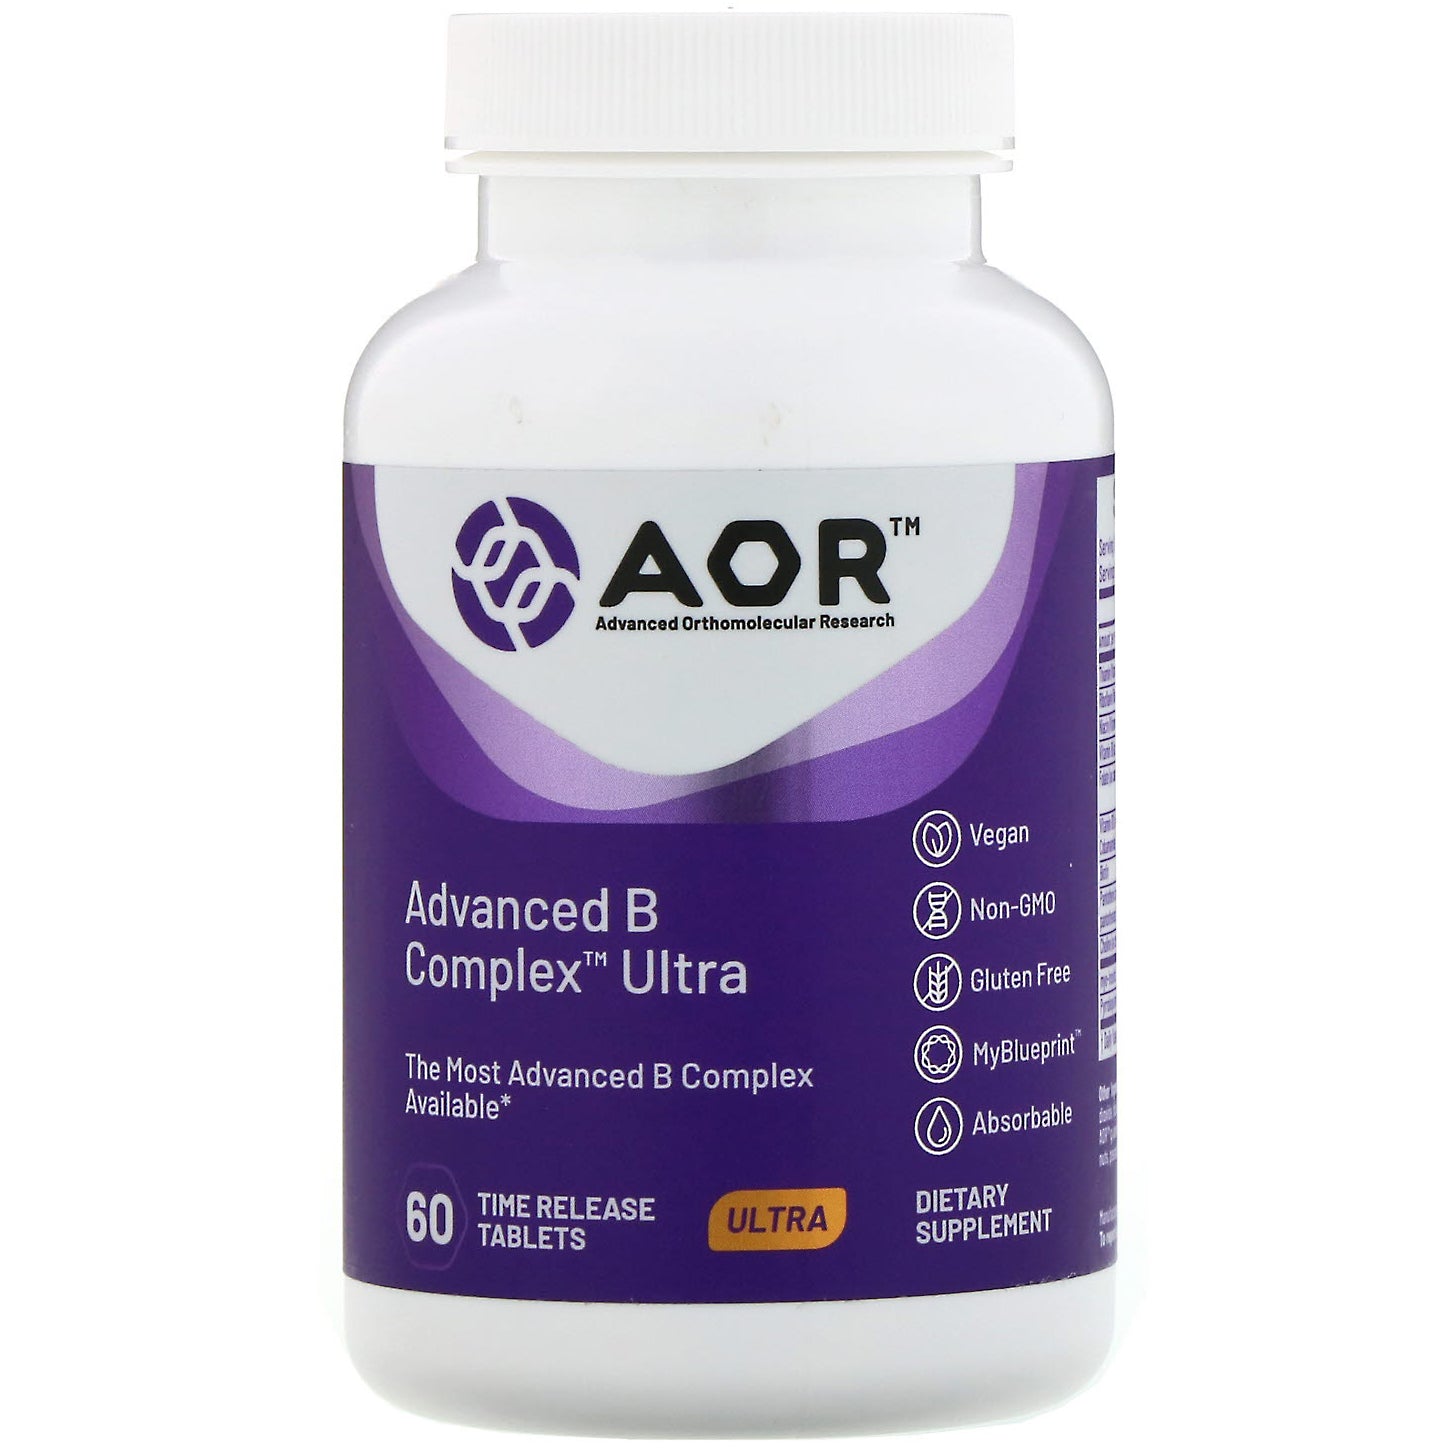 Advanced Orthomolecular Research AOR, Advanced B Complex Ultra, 60 Time Release Tablets